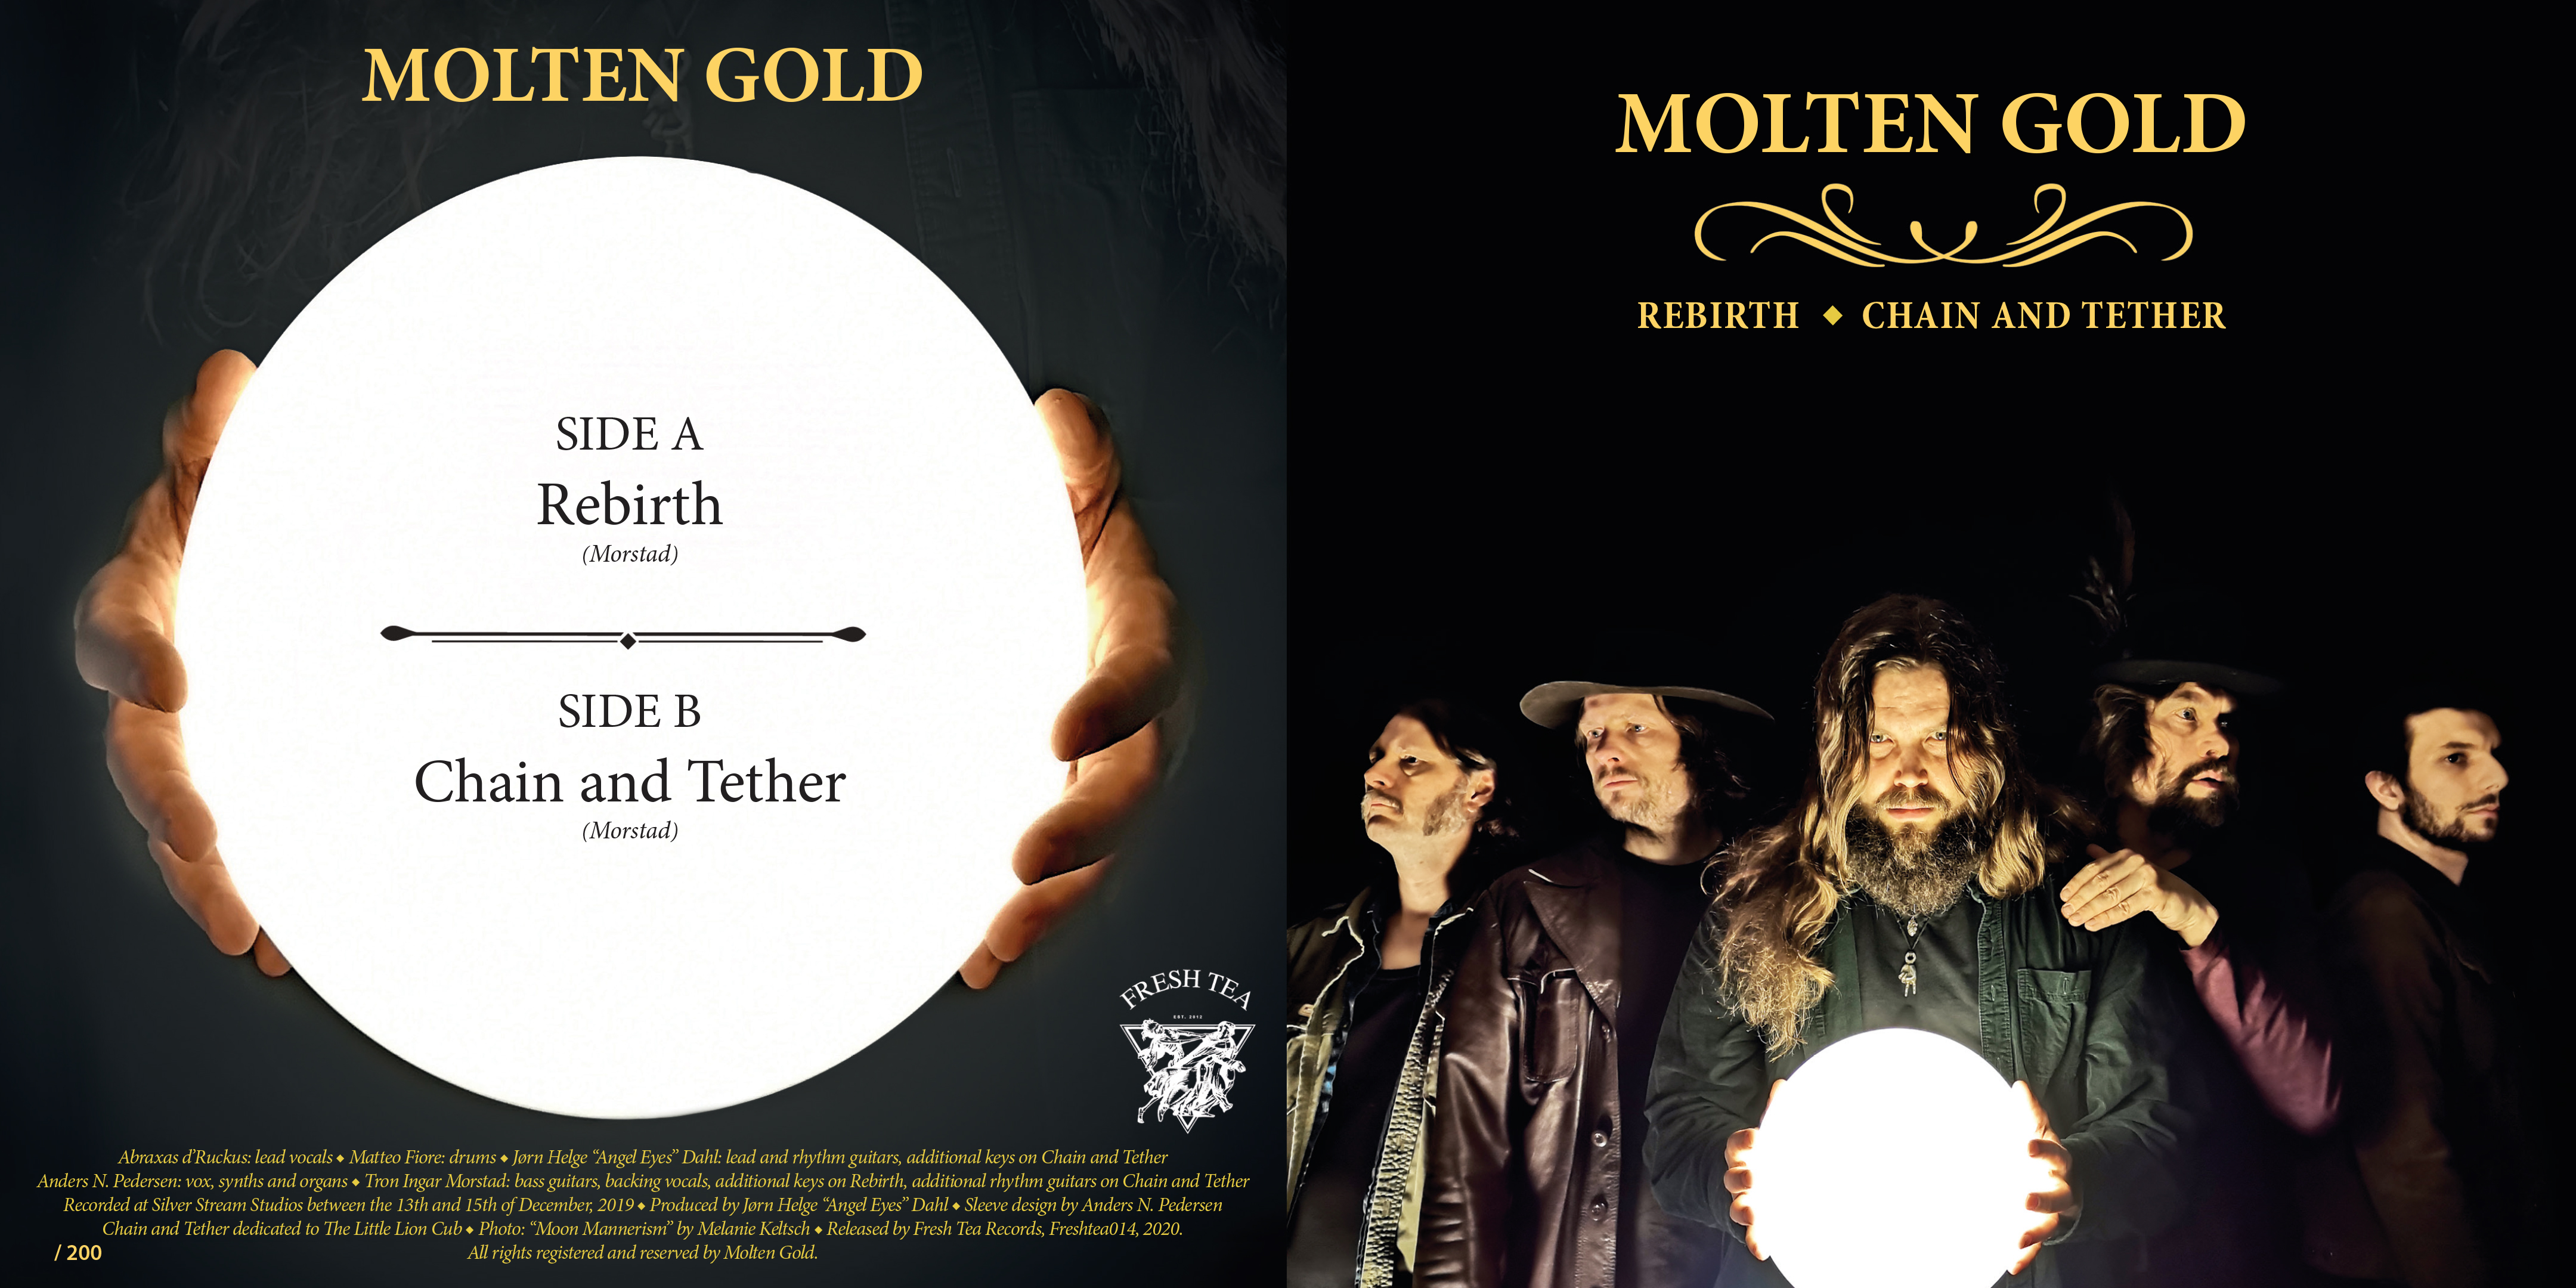 MOLTEN GOLD – out with new singel on vinyl